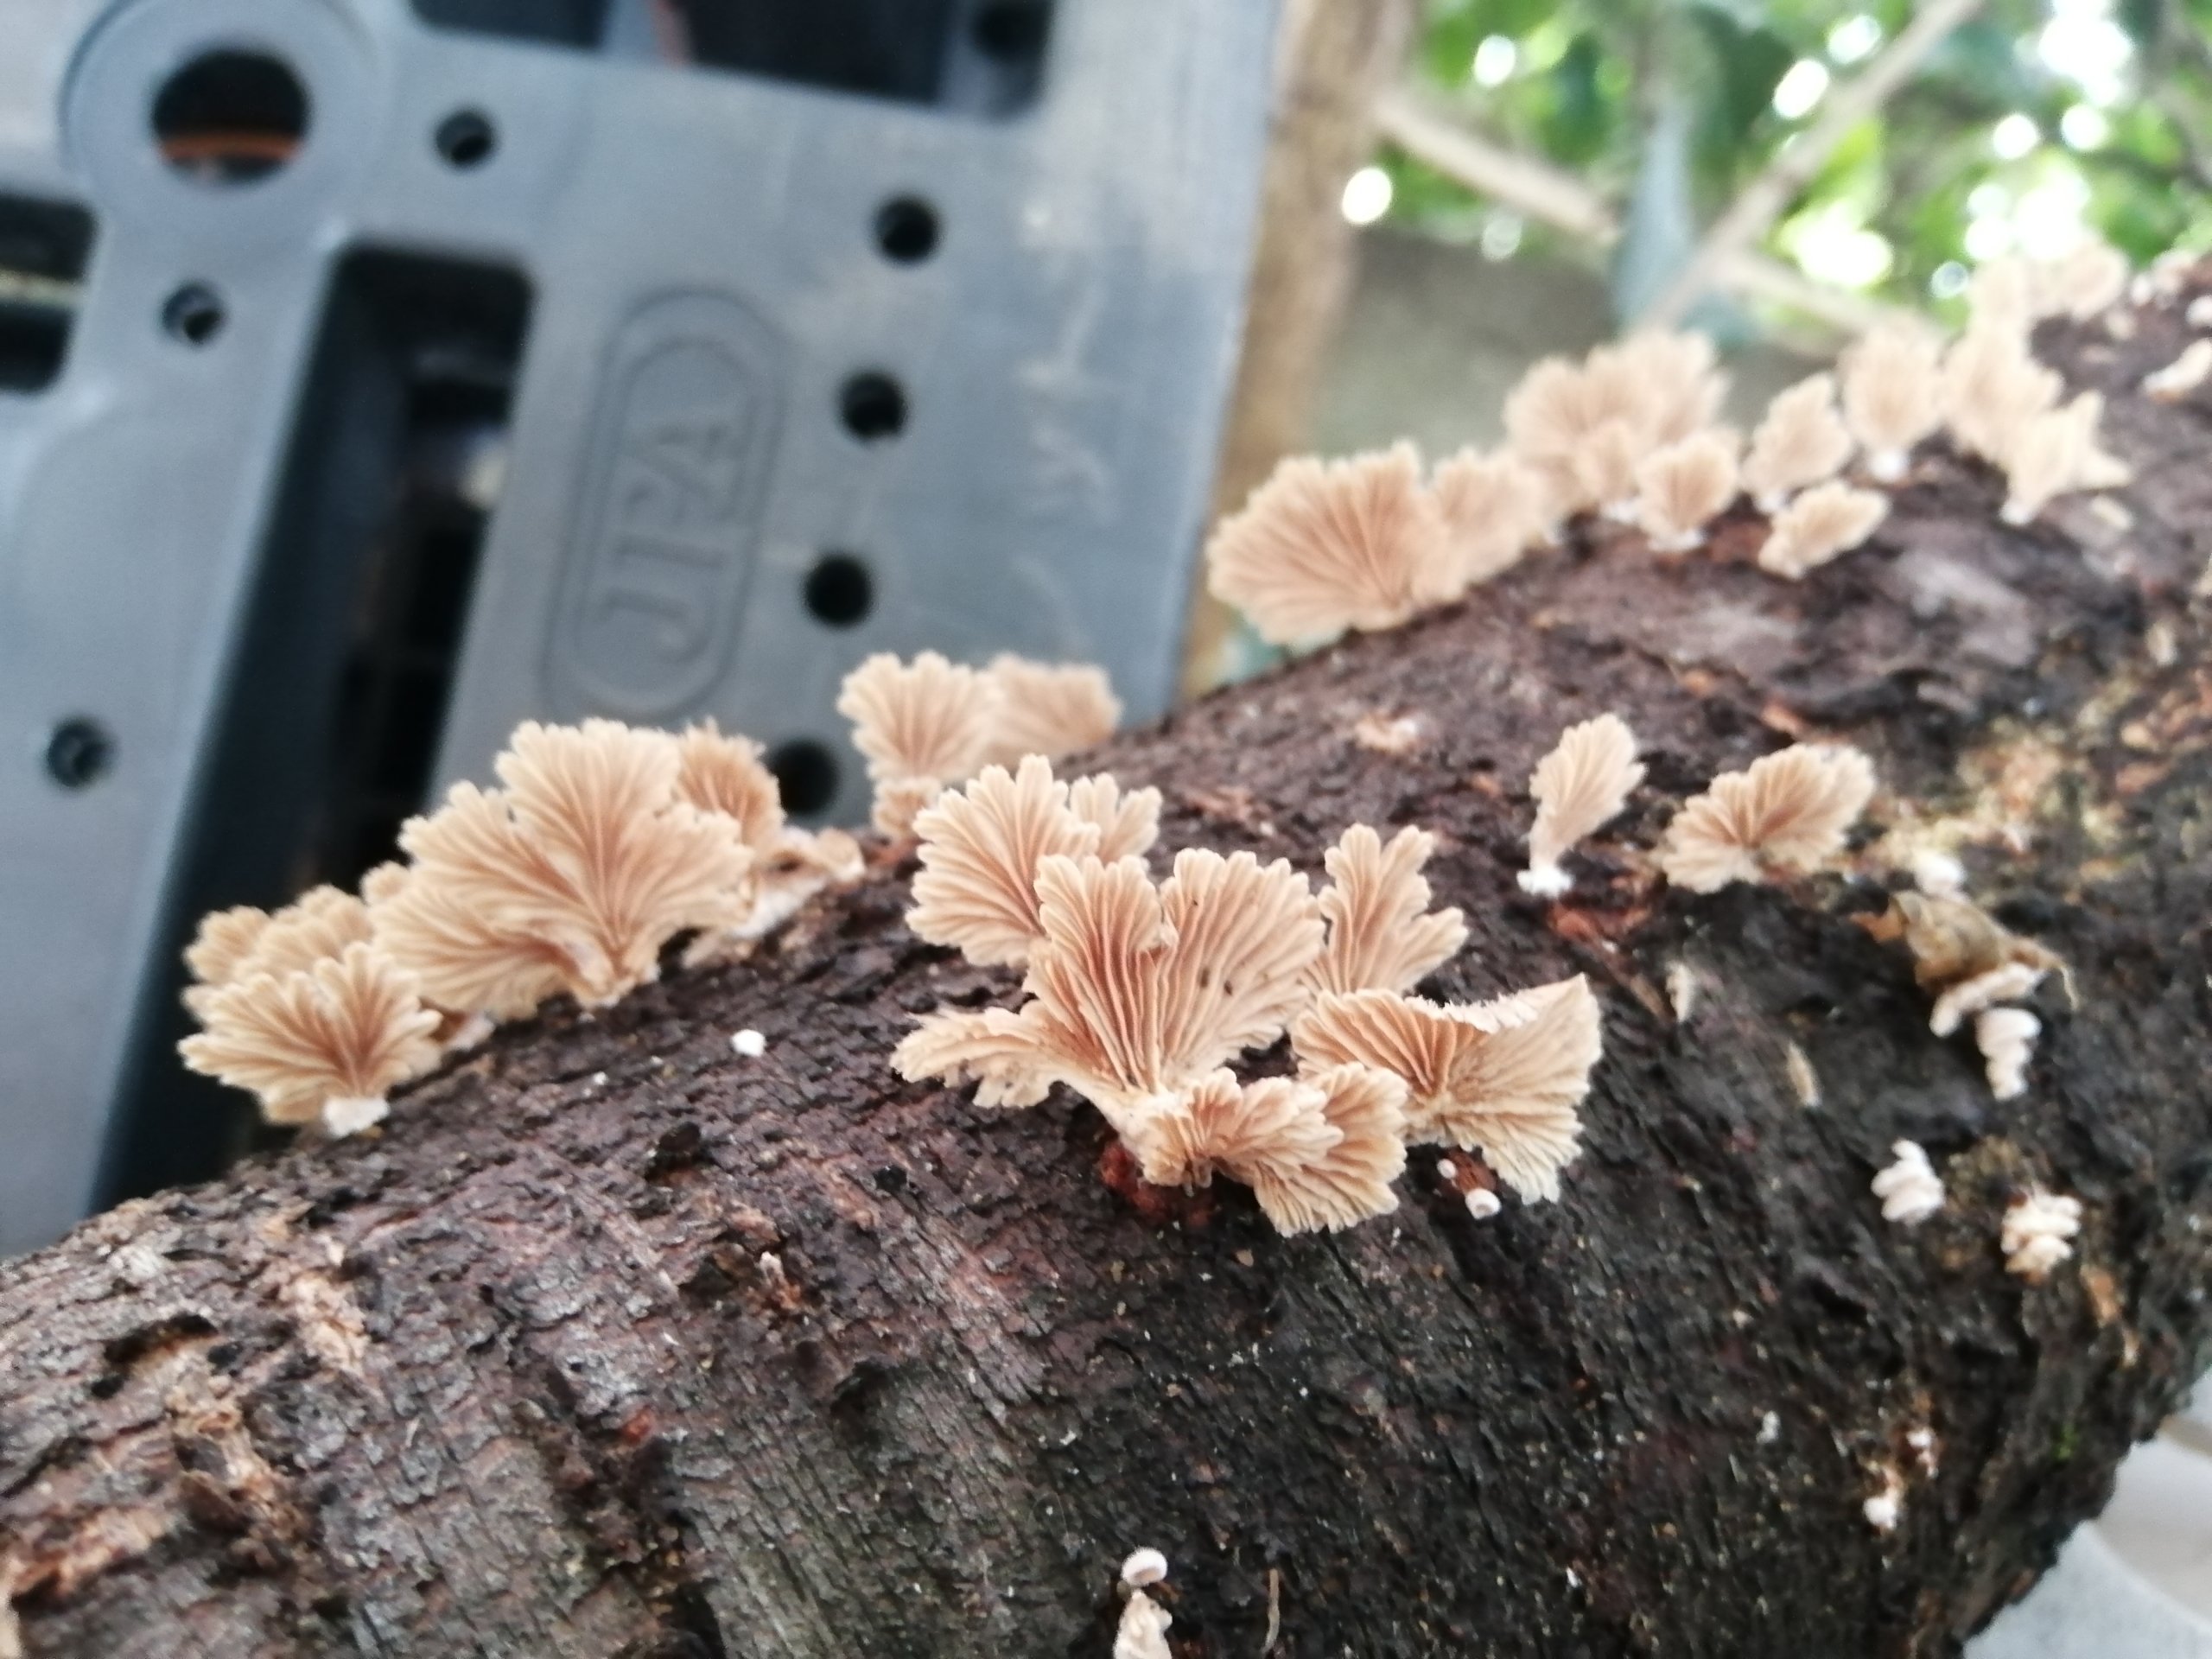 Potential coral mushrooms I put on the North side of my house.